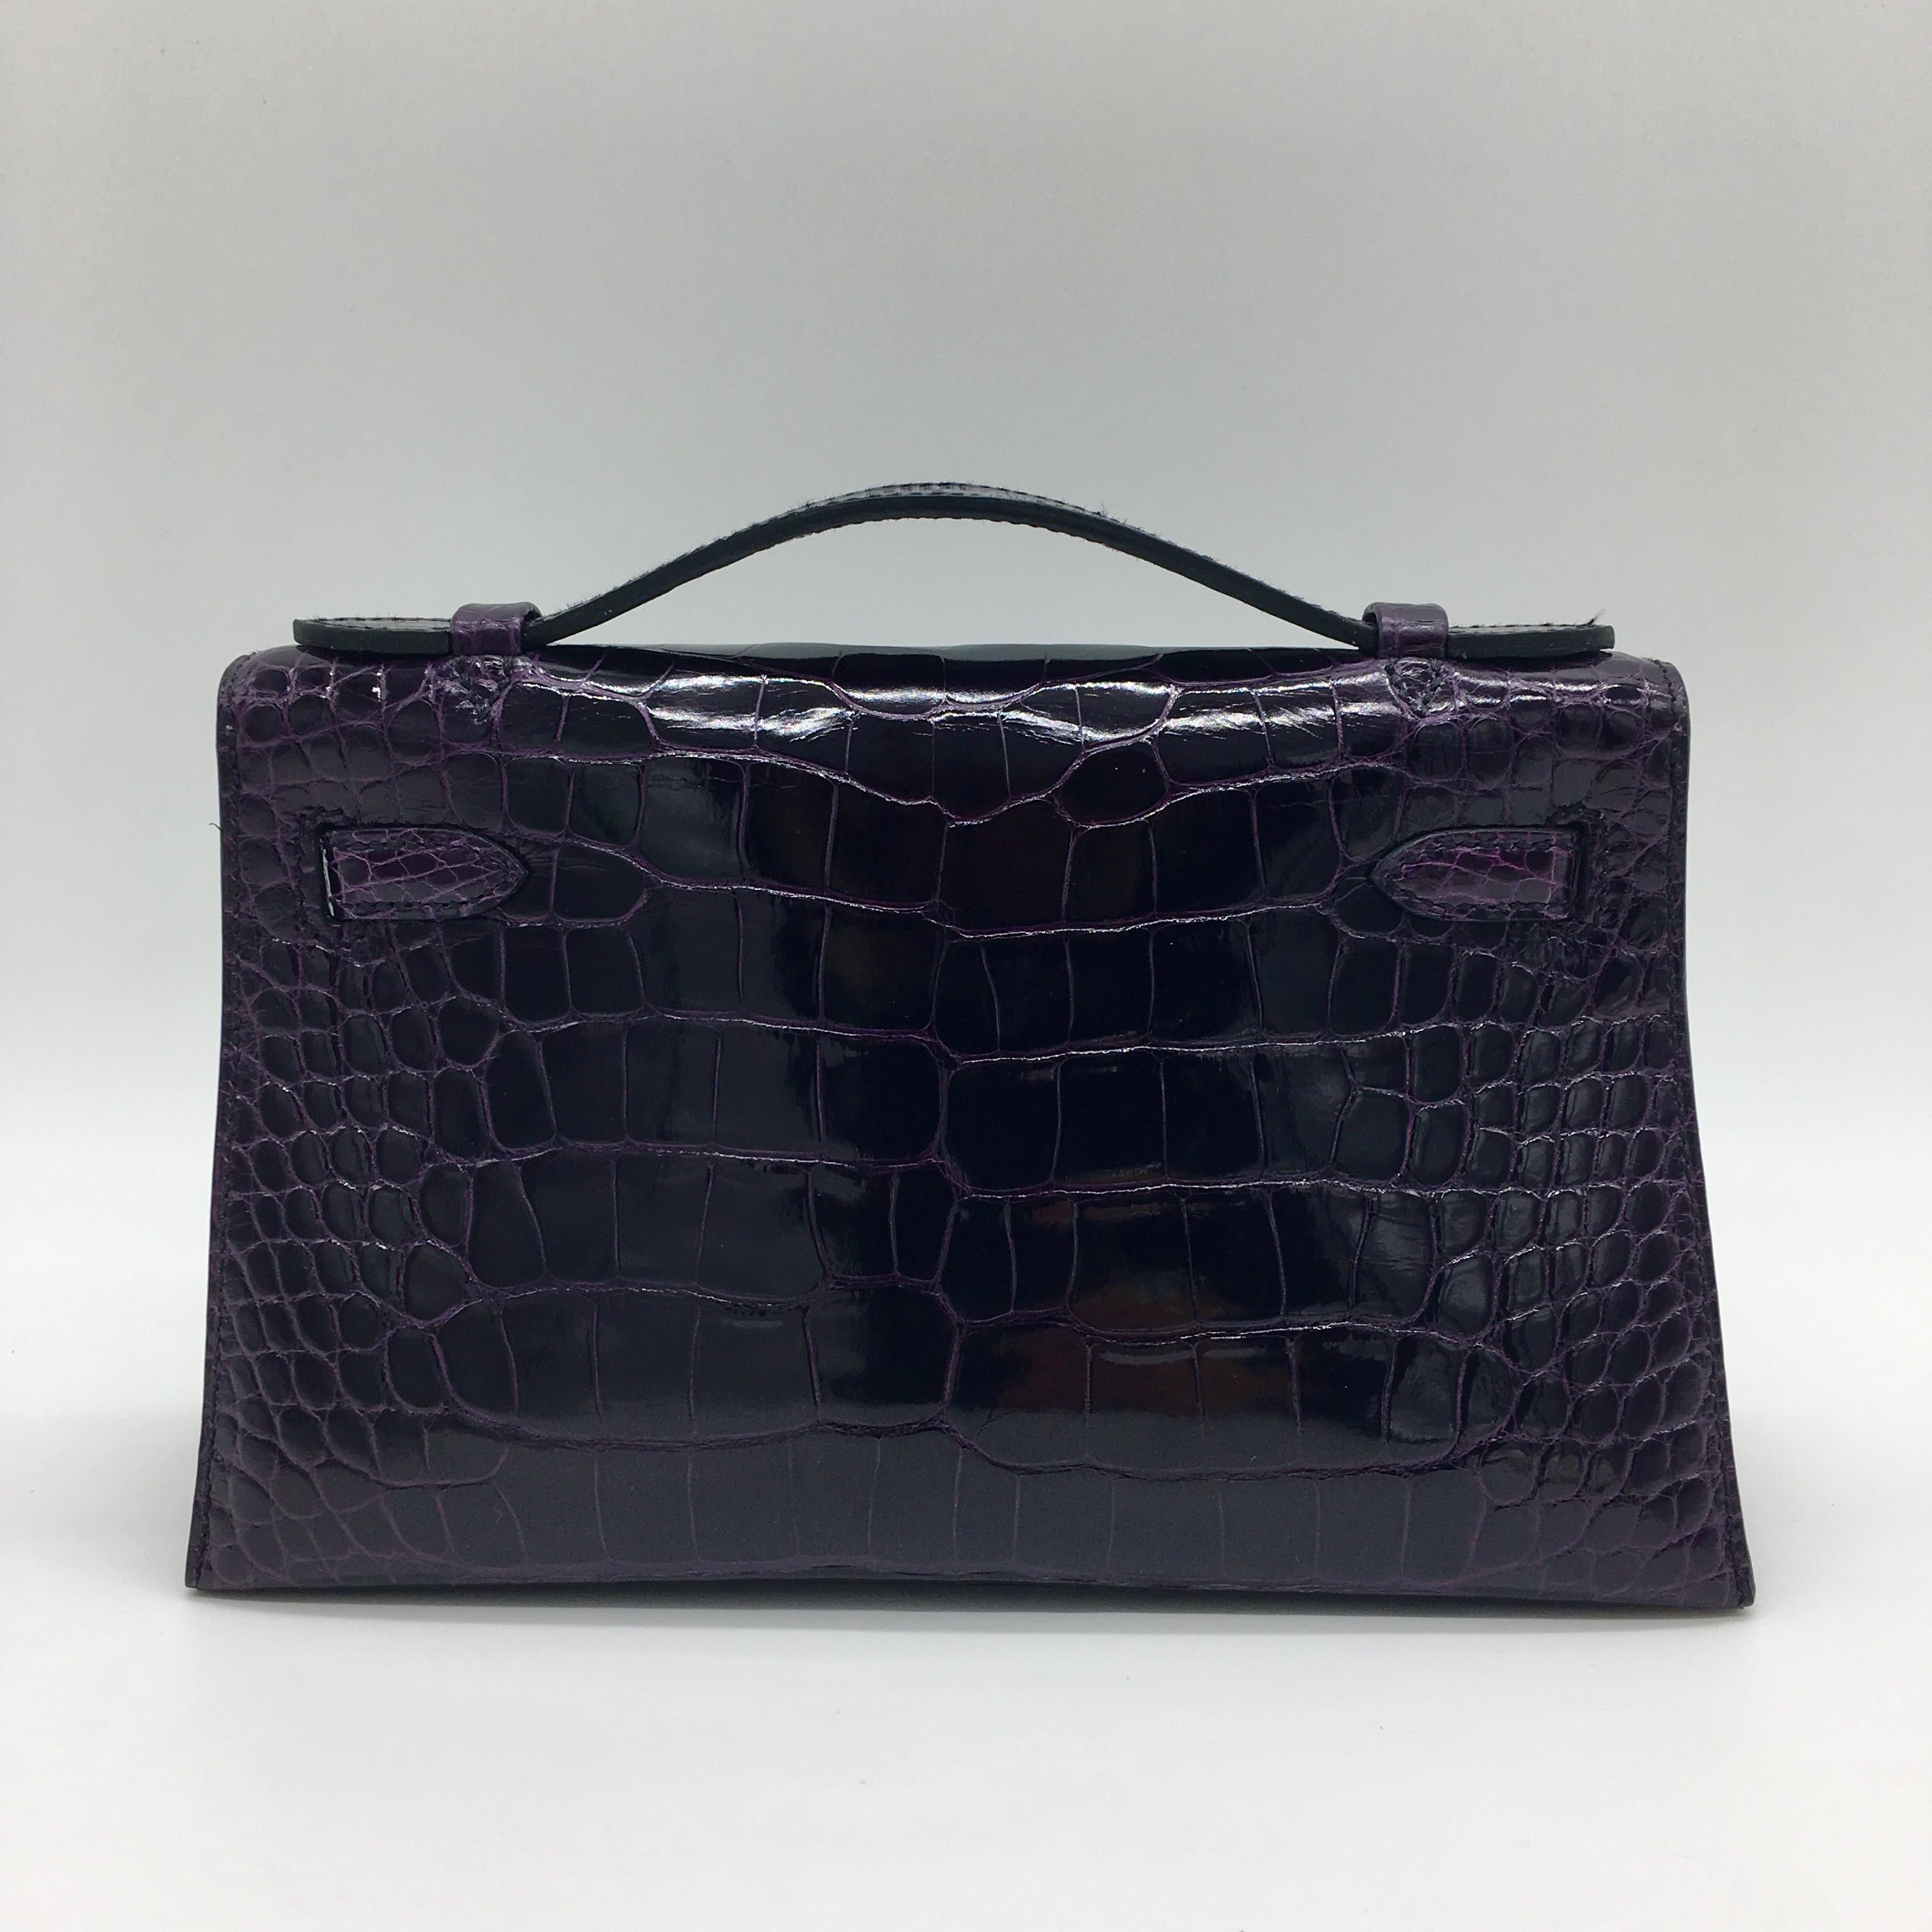 The name may not be especially beautiful, but the colour itself is amazing. It’s a really deep rich purple, almost black in certain light and one that we don’t see very often. In this combination of Shiny Croc leather and Gold Hardware it’s a really